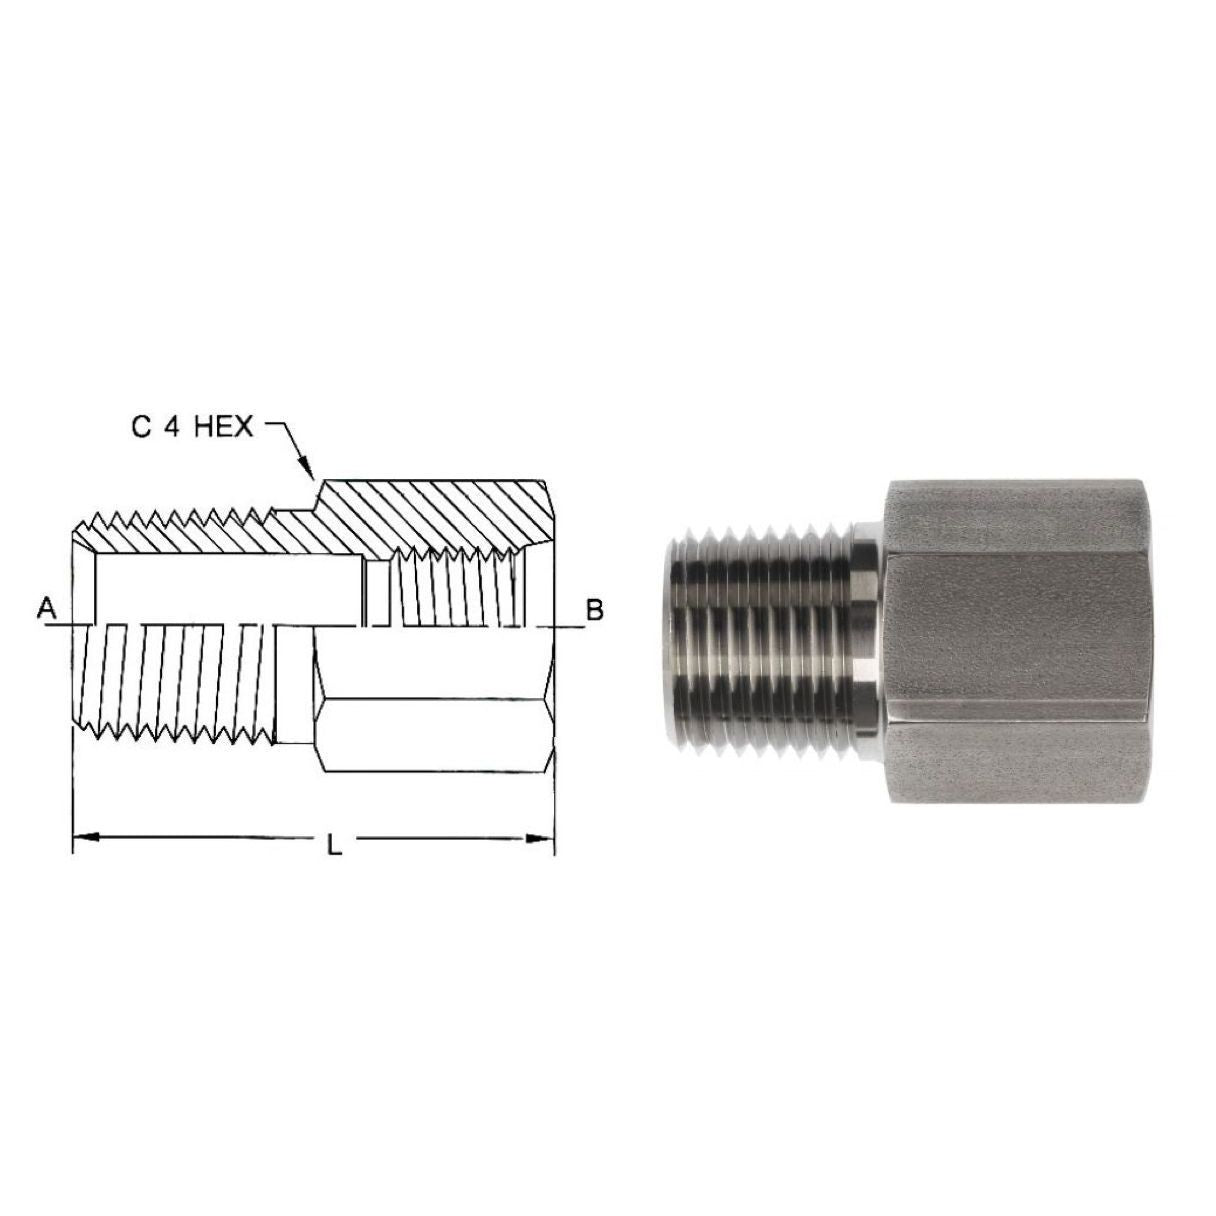 6404-08-08 : OneHydraulics Adapter, Straight, 0.5 (1/2") Female ORB x 0.5 (1/2") Male, Steel